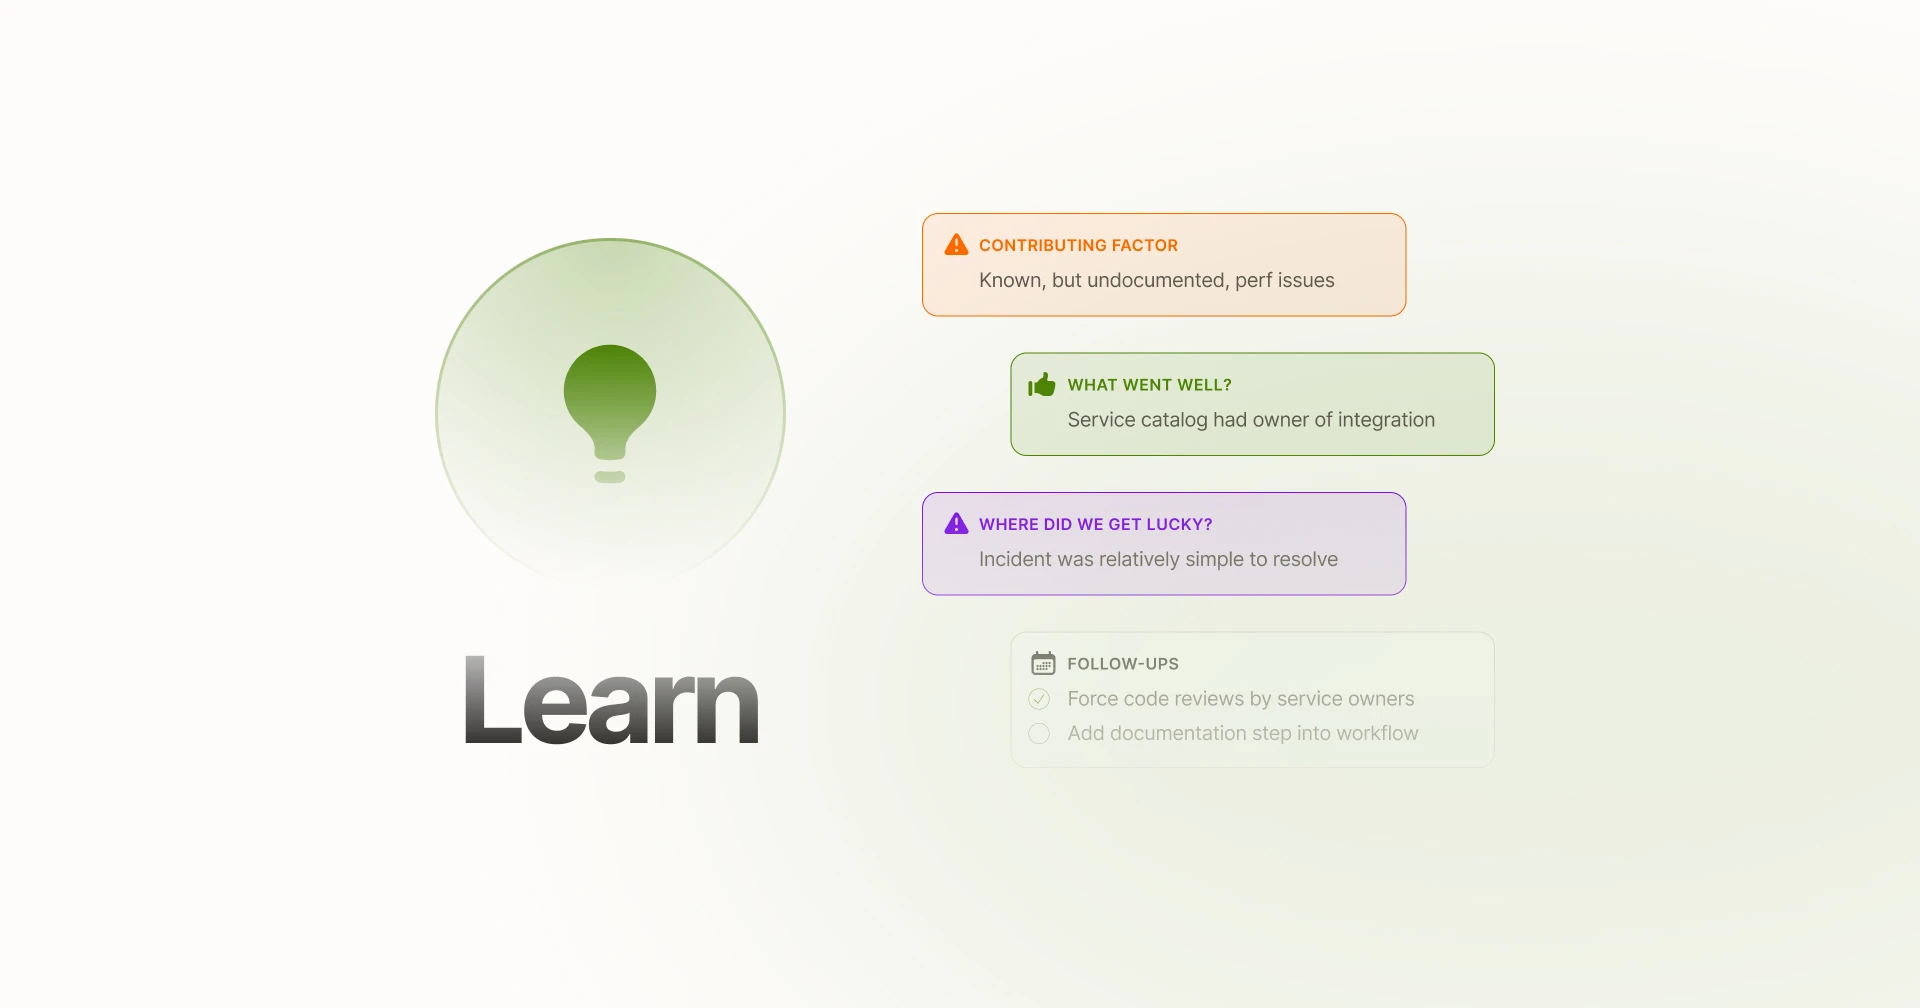 How To Take Learning From Incidents to the Next Level